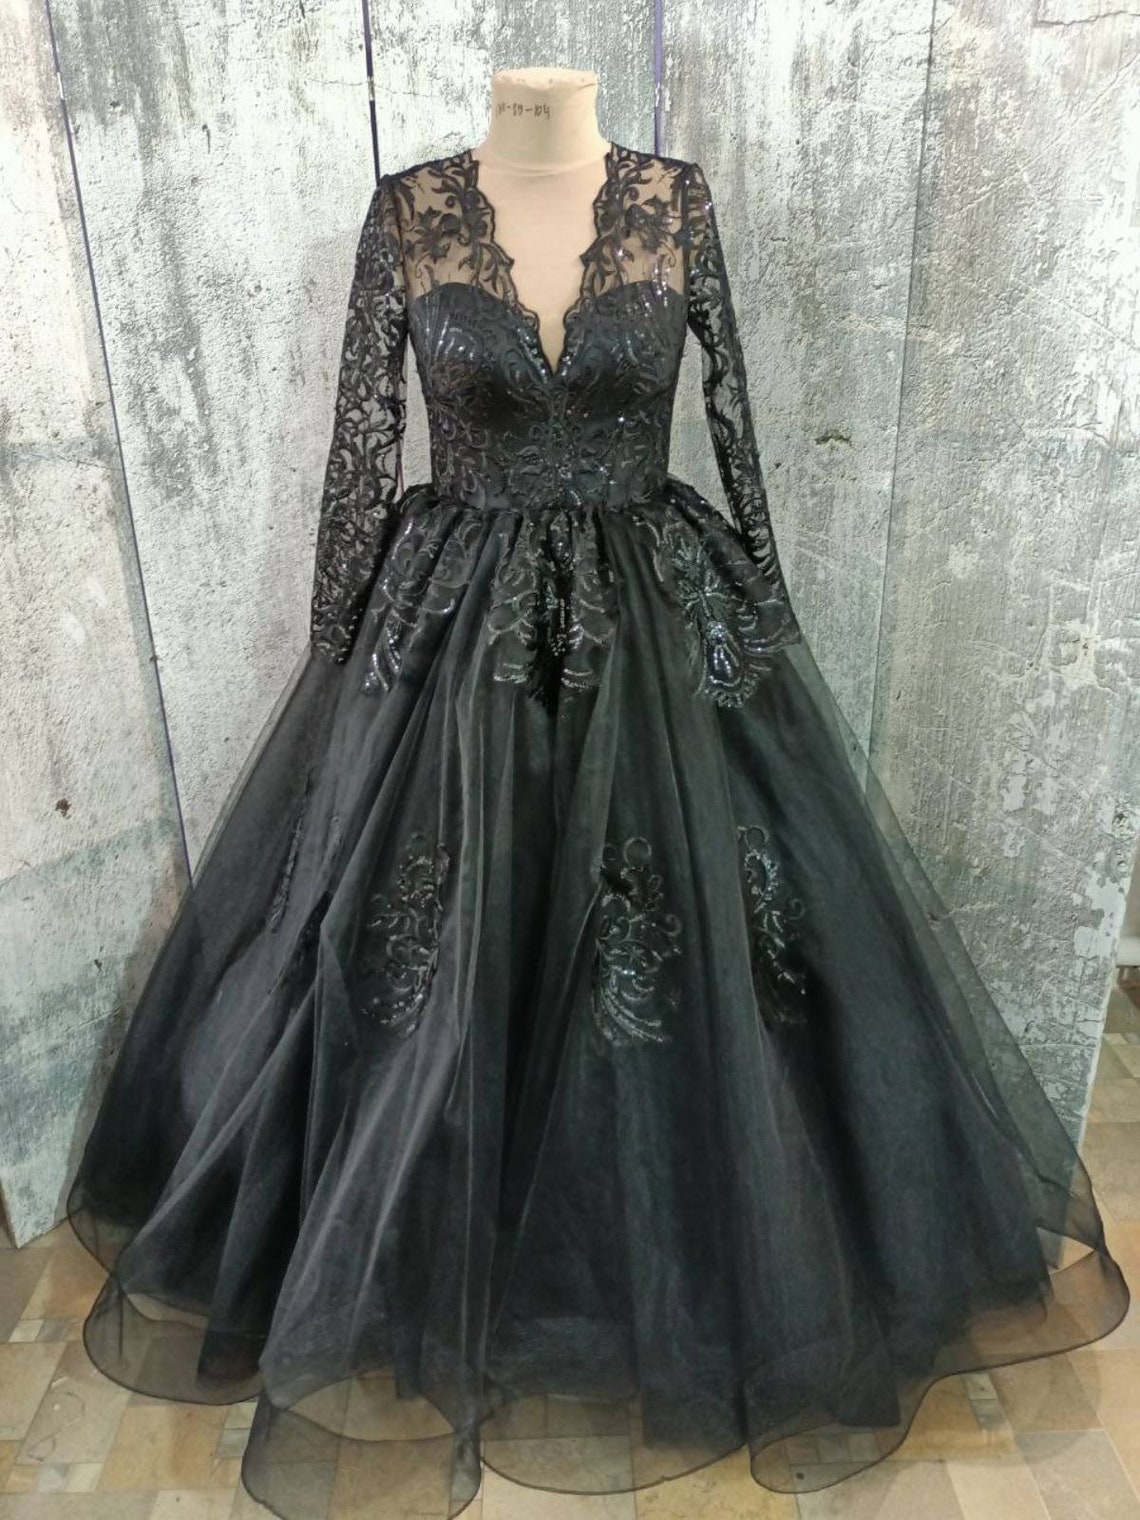 Black Bridal Gown Tulle Lace Dress Simple Dress Prom Dress - Etsy